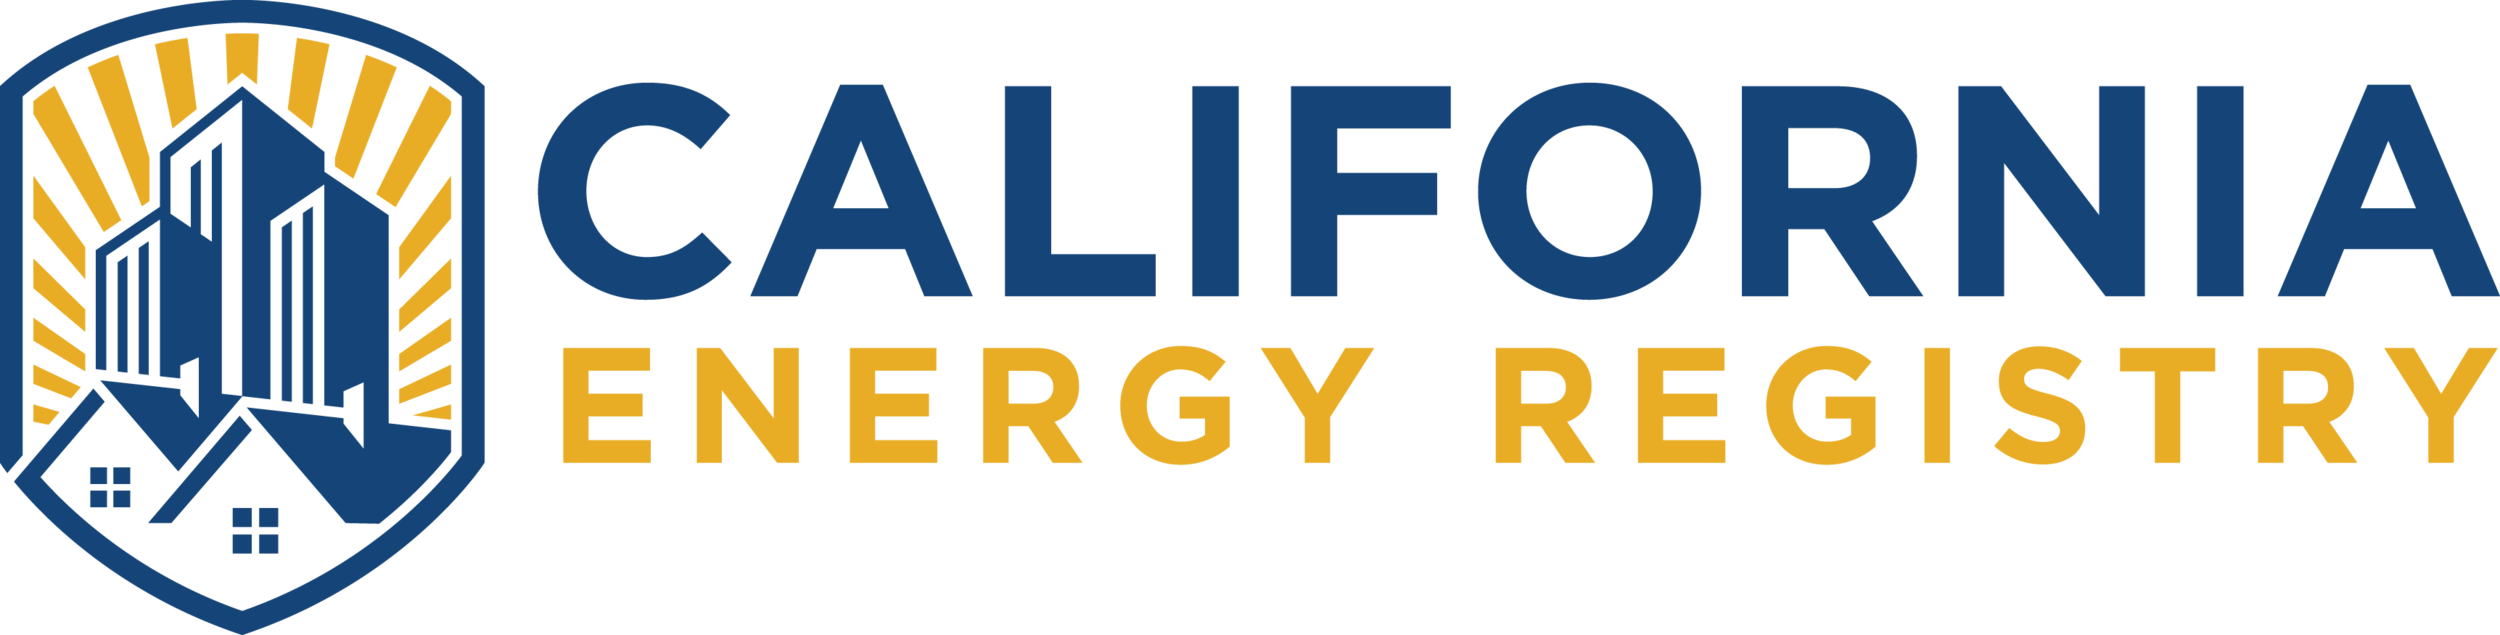 CalEnergy_Main.png